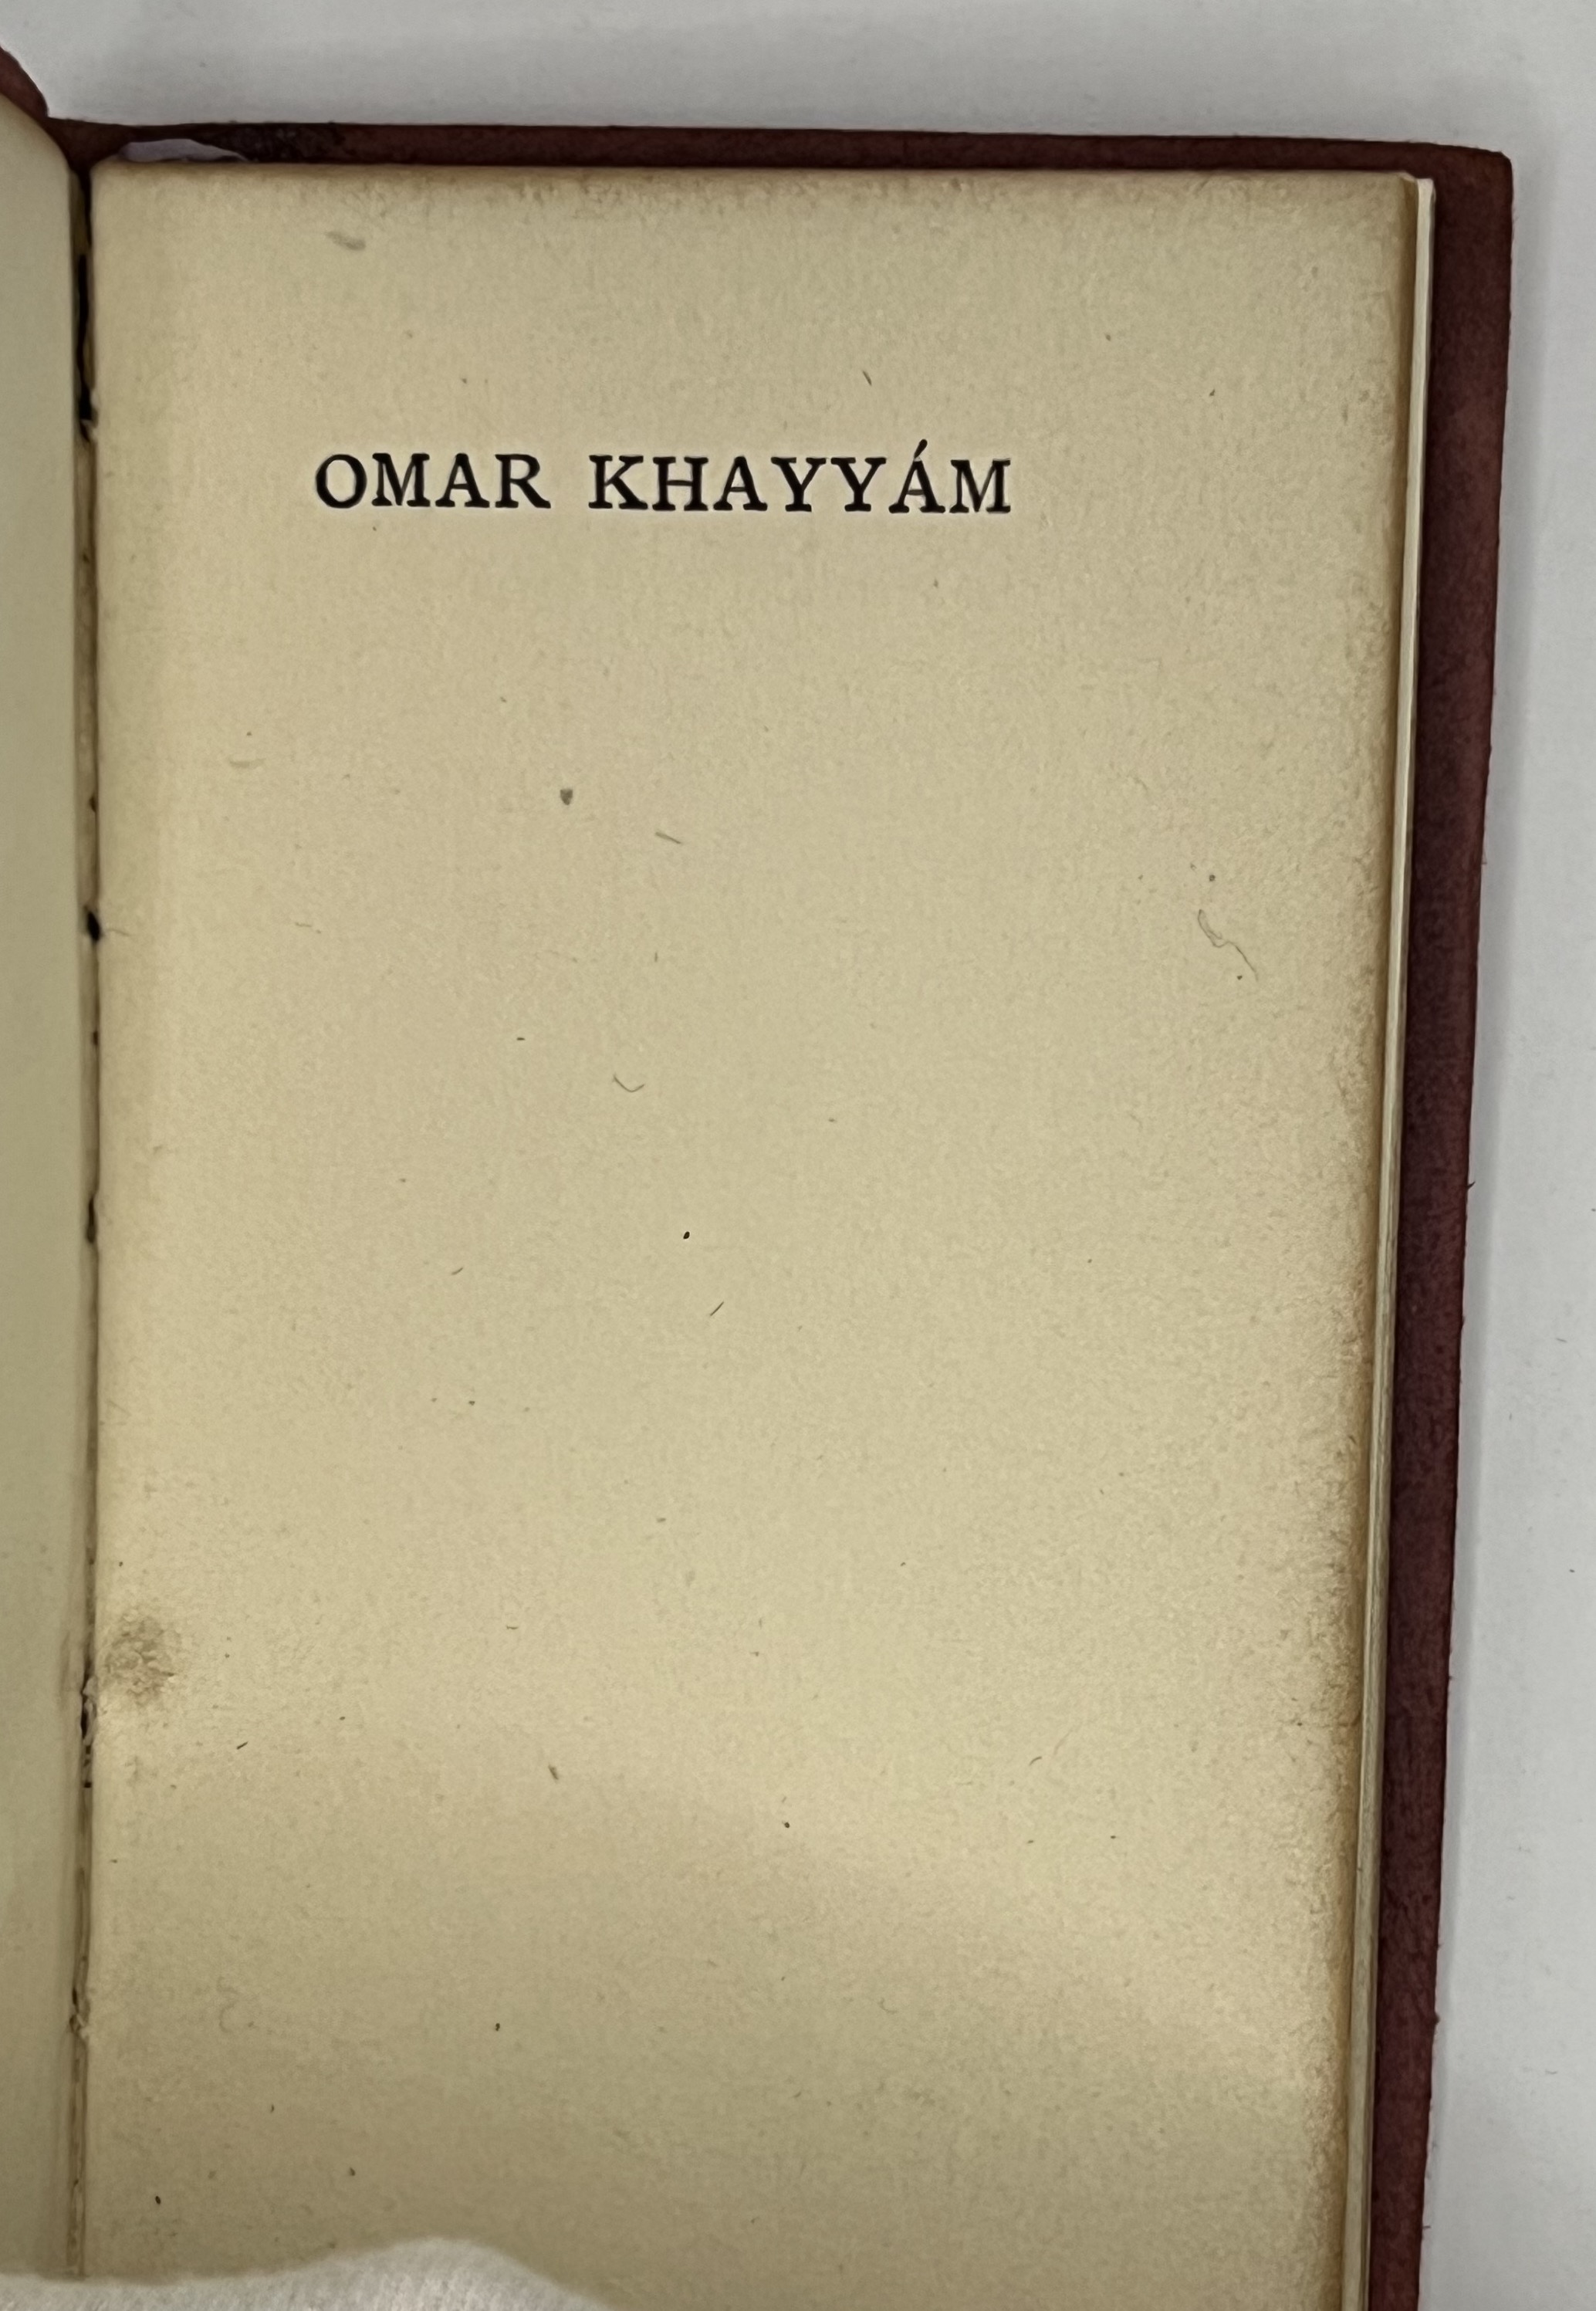 Initial title page of sorts that says Omar Khayyam